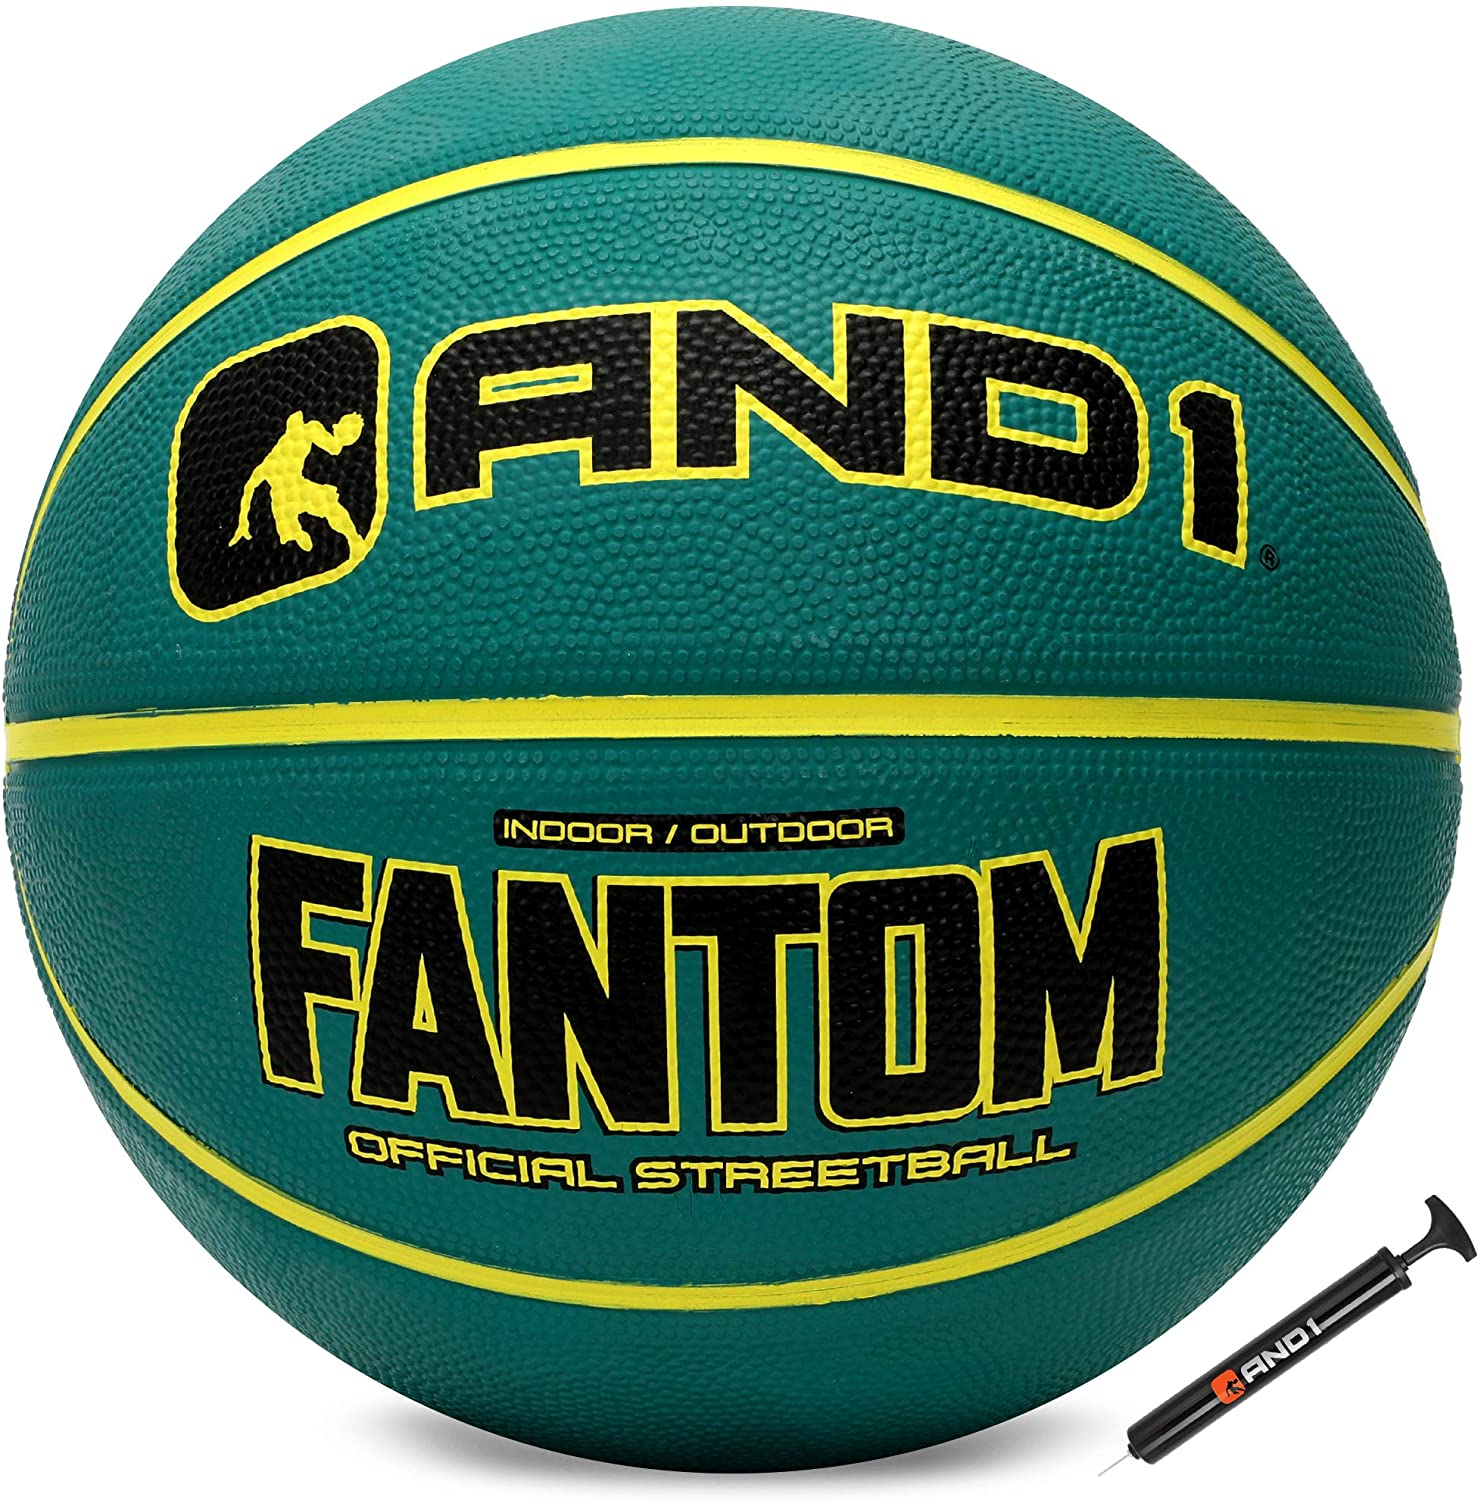 AND1 Fantom Rubber